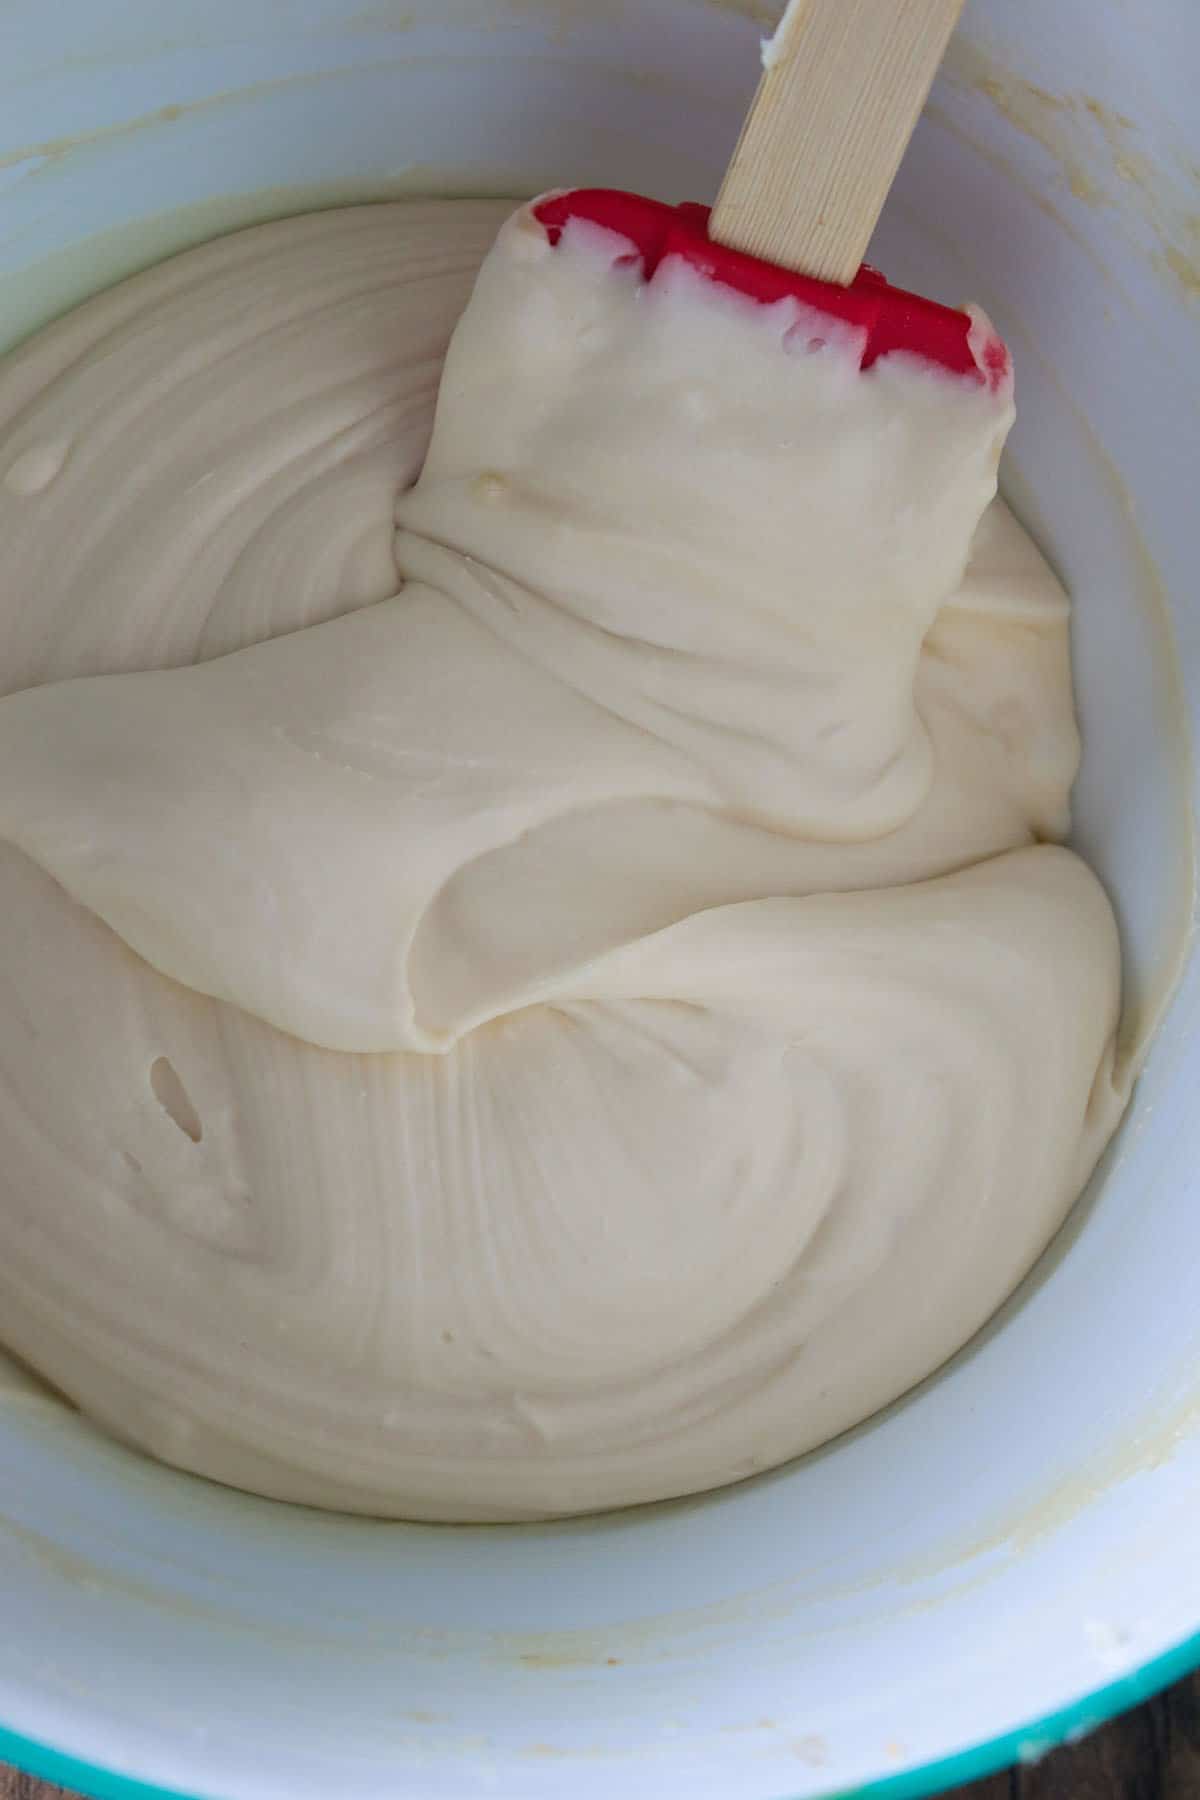 The coffee cream cheese icing in a bowl.